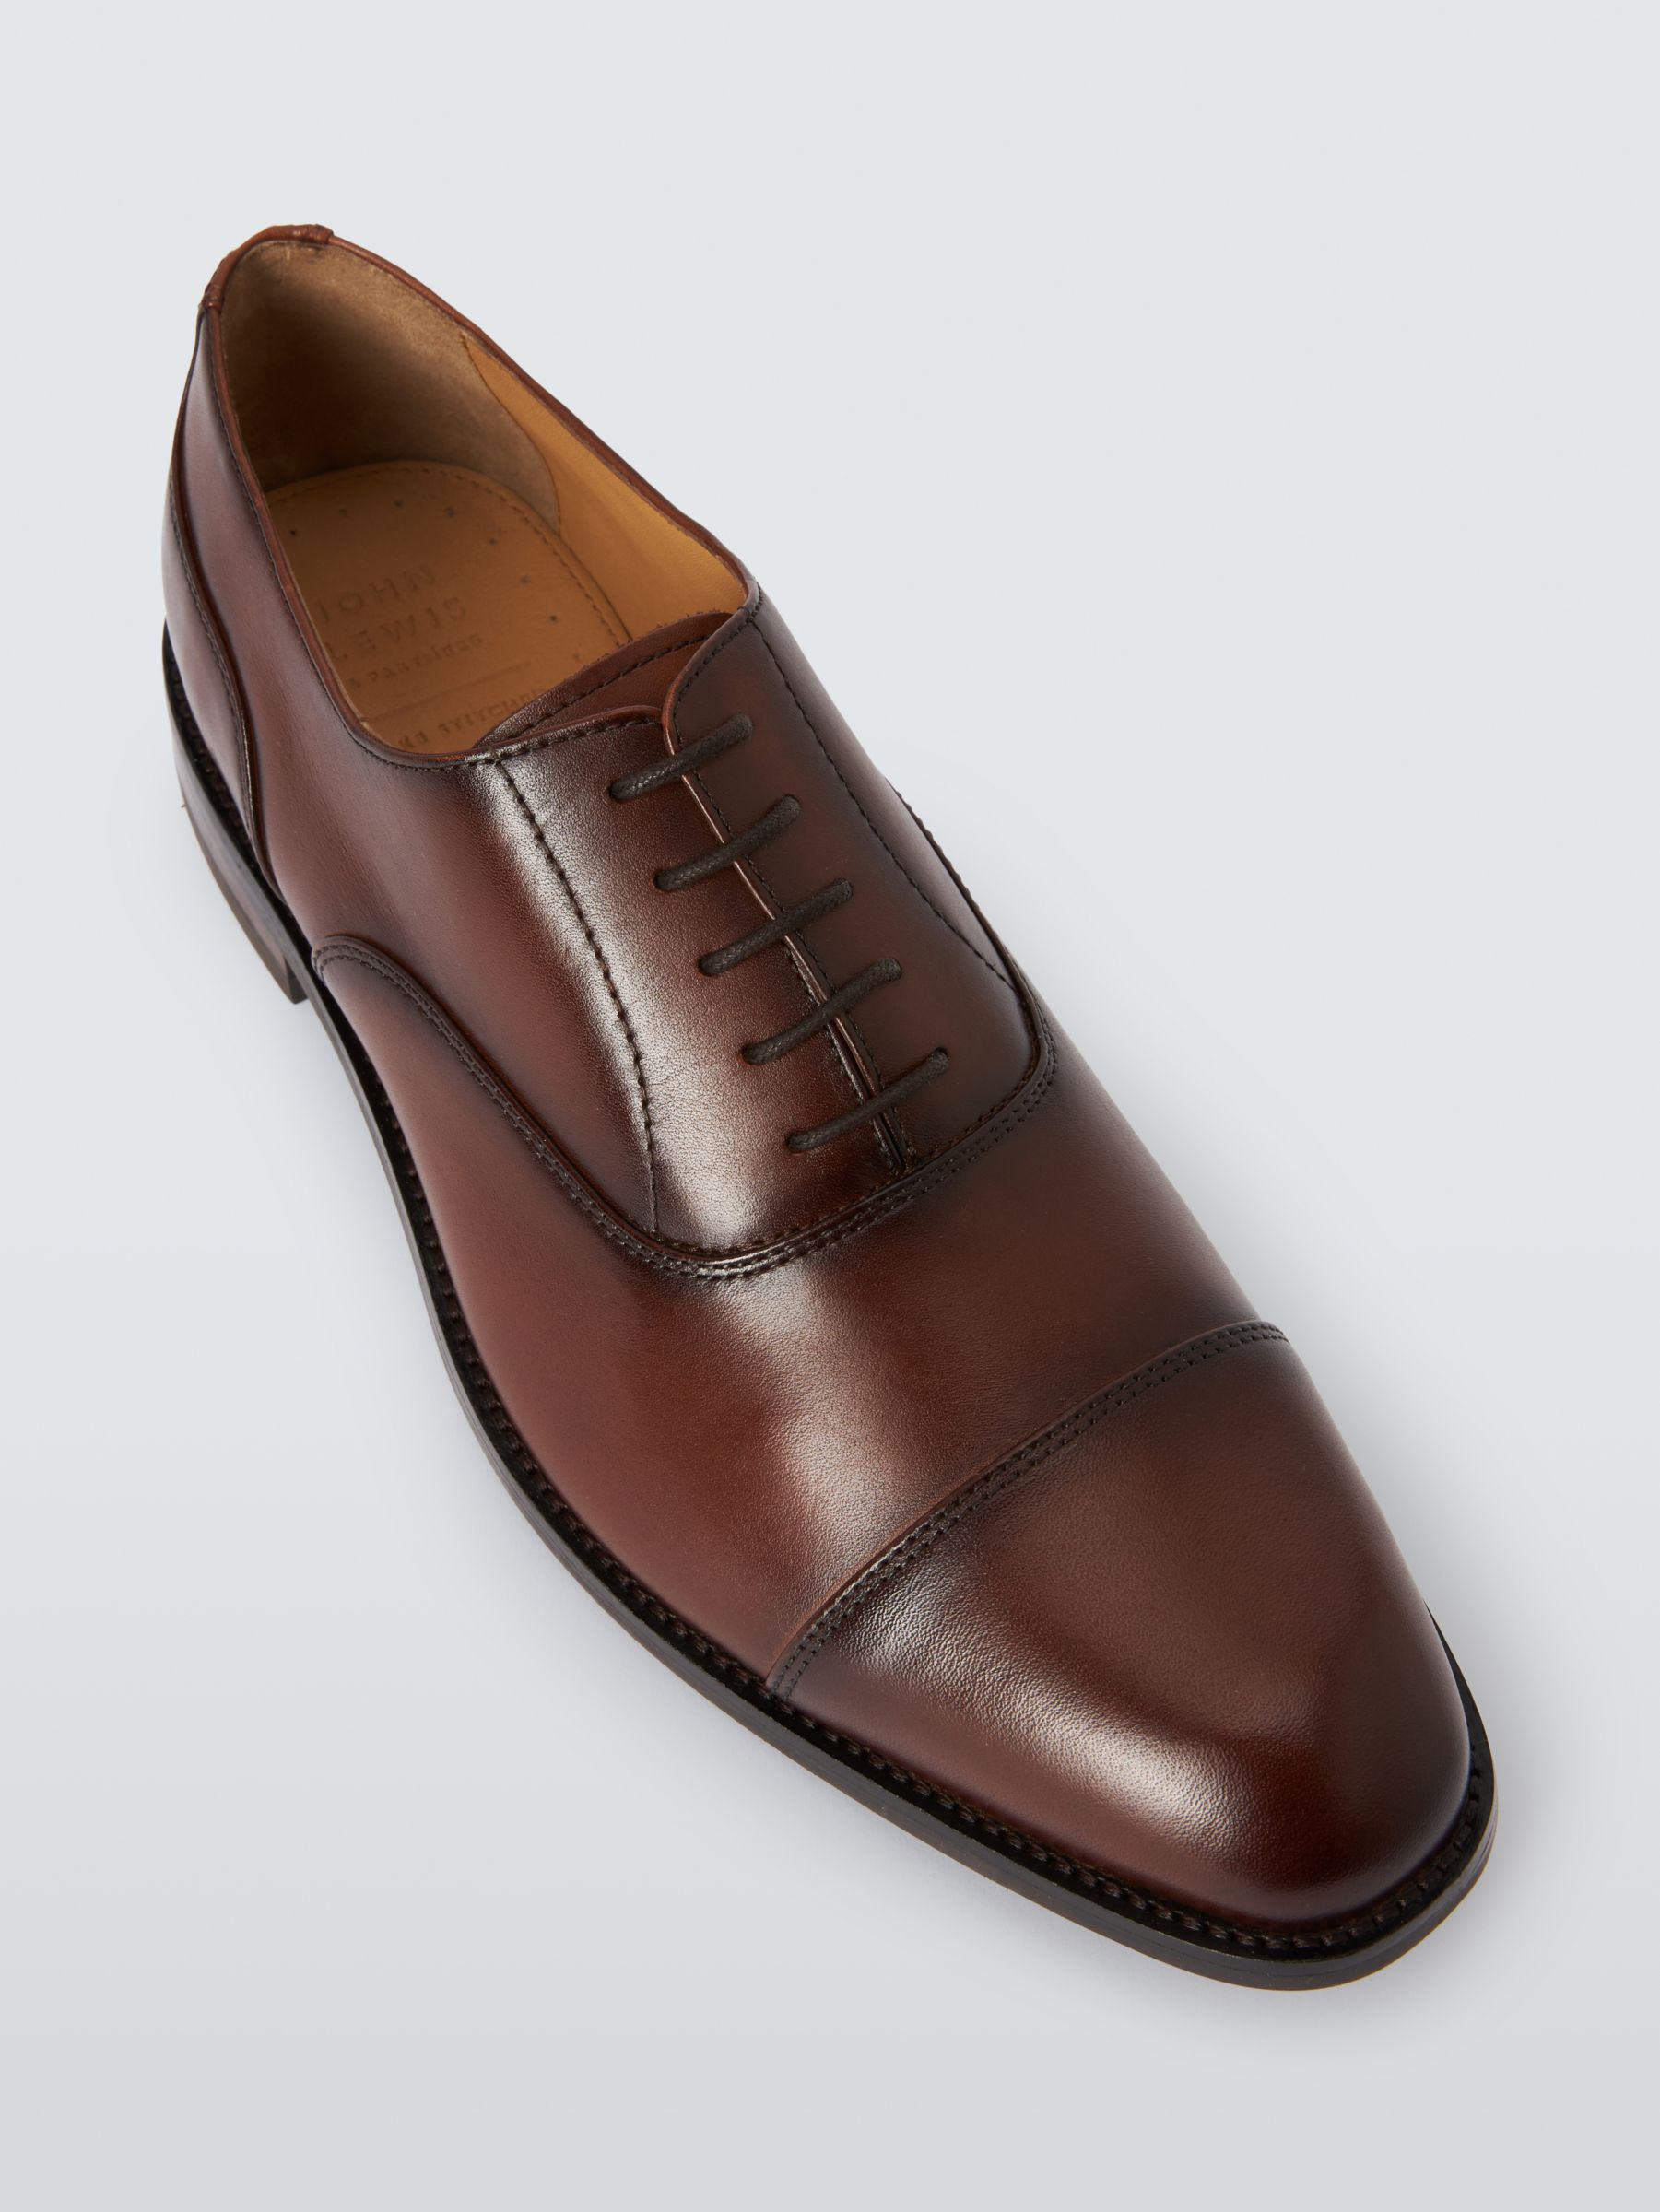 Buy John Lewis Leather Classic Oxford Shoes Online at johnlewis.com